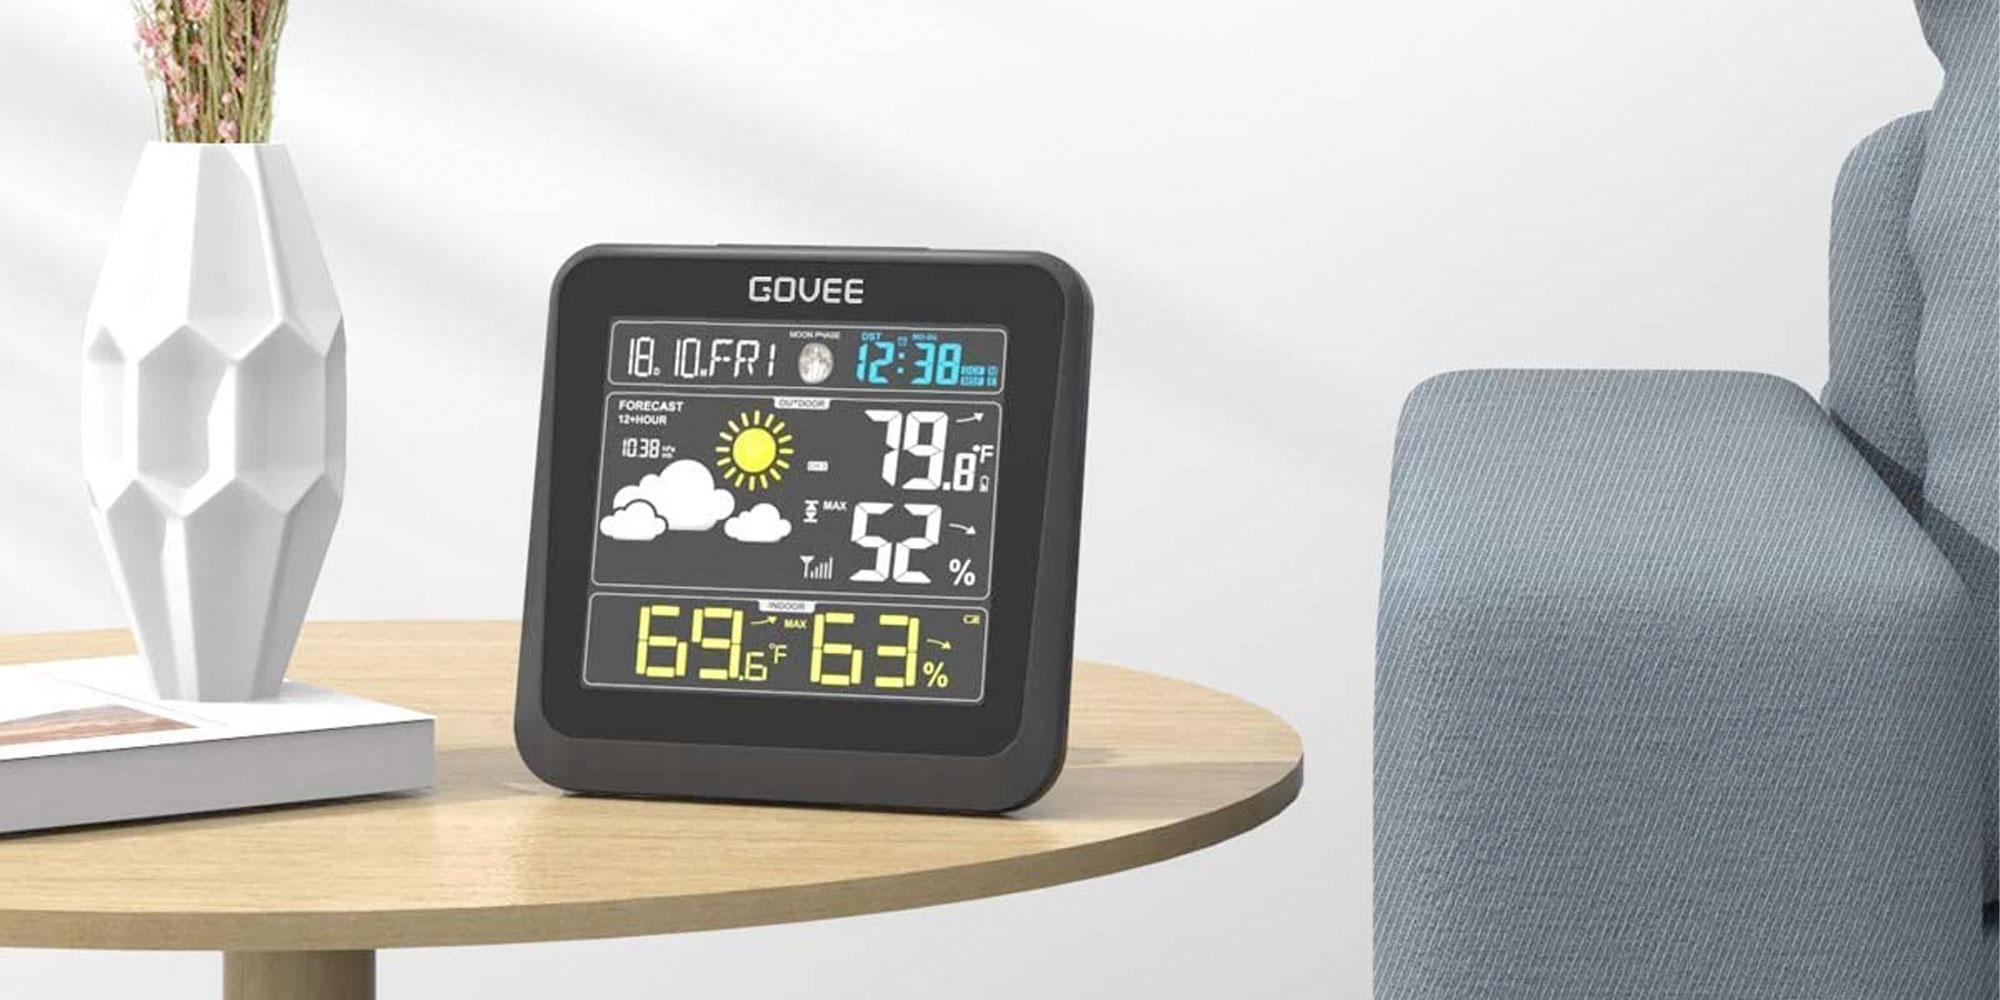 https://9to5toys.com/wp-content/uploads/sites/5/2020/09/govee-wireless-weather-station.jpg